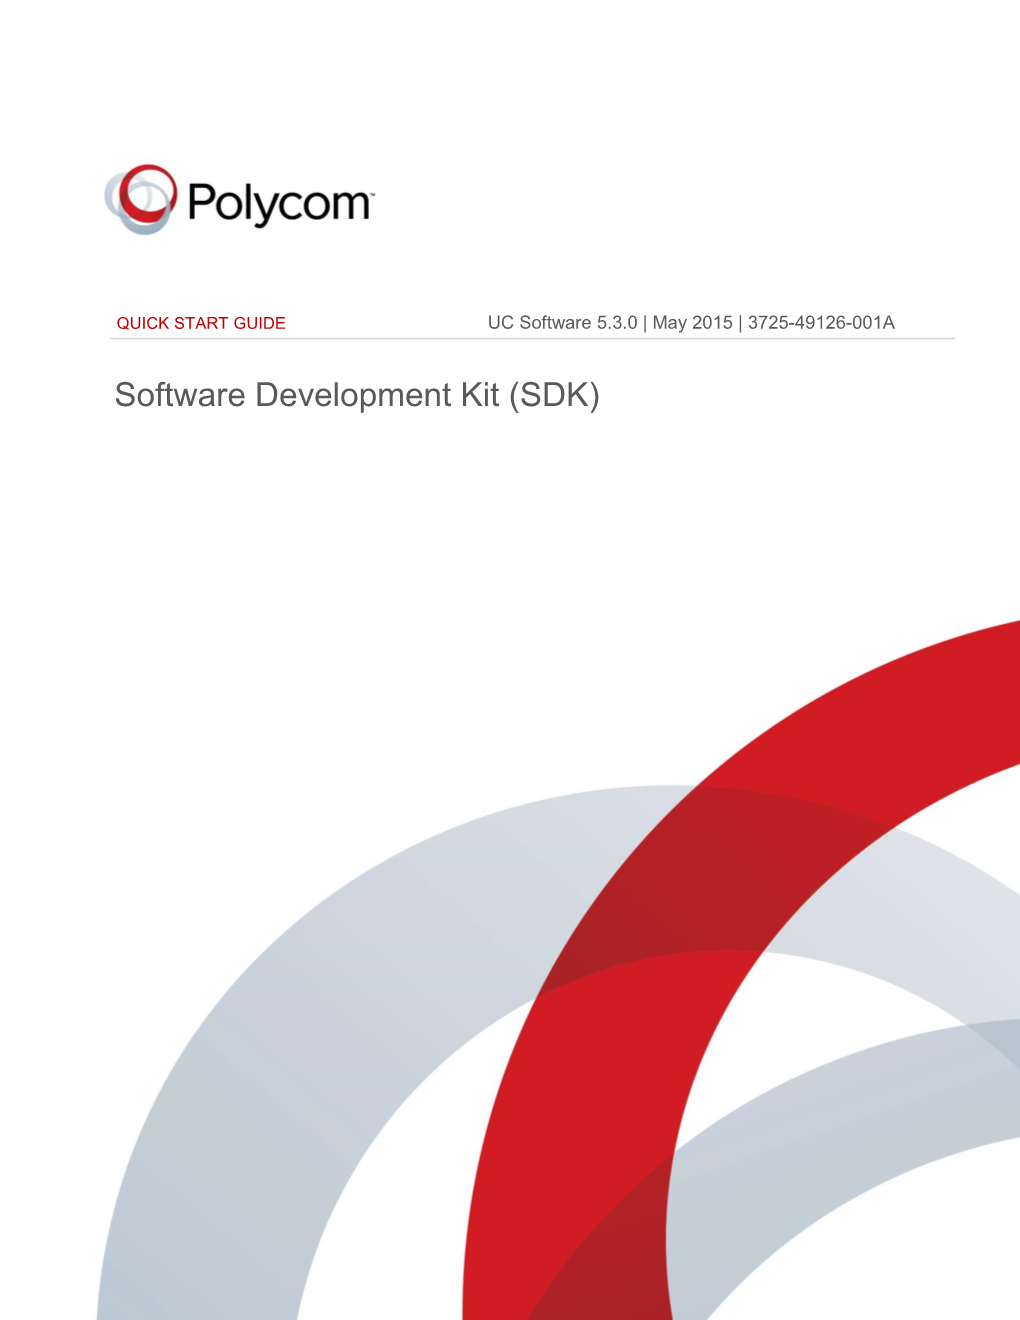 Quick Start Guide for Polycom UC Software Development Kit 5.3.0